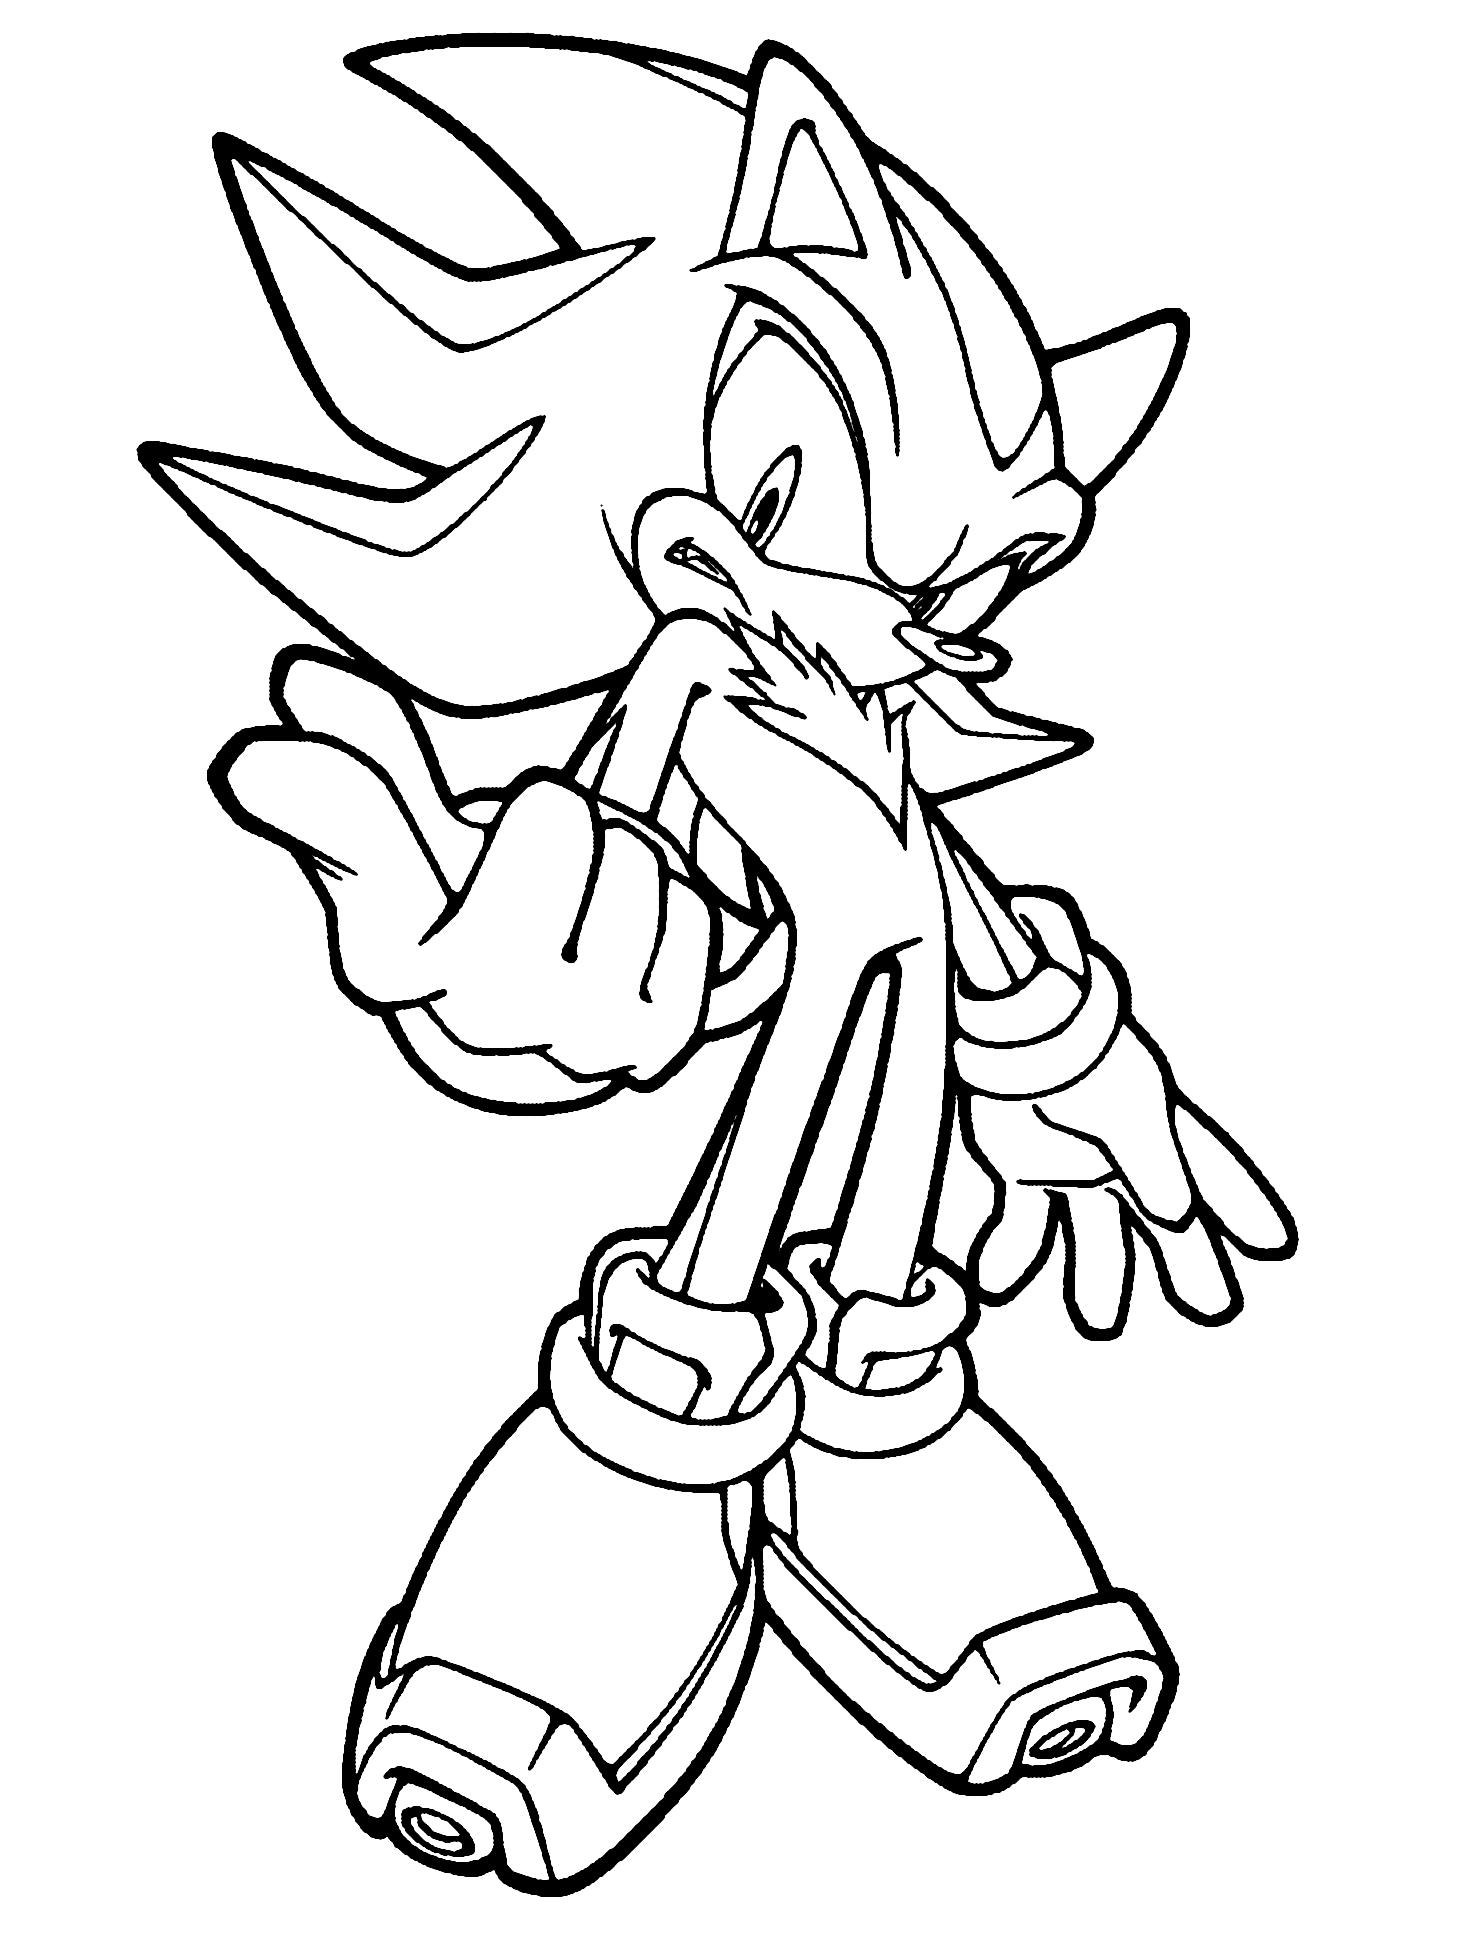 sonic knuckles coloring pages - SheetalColor.com